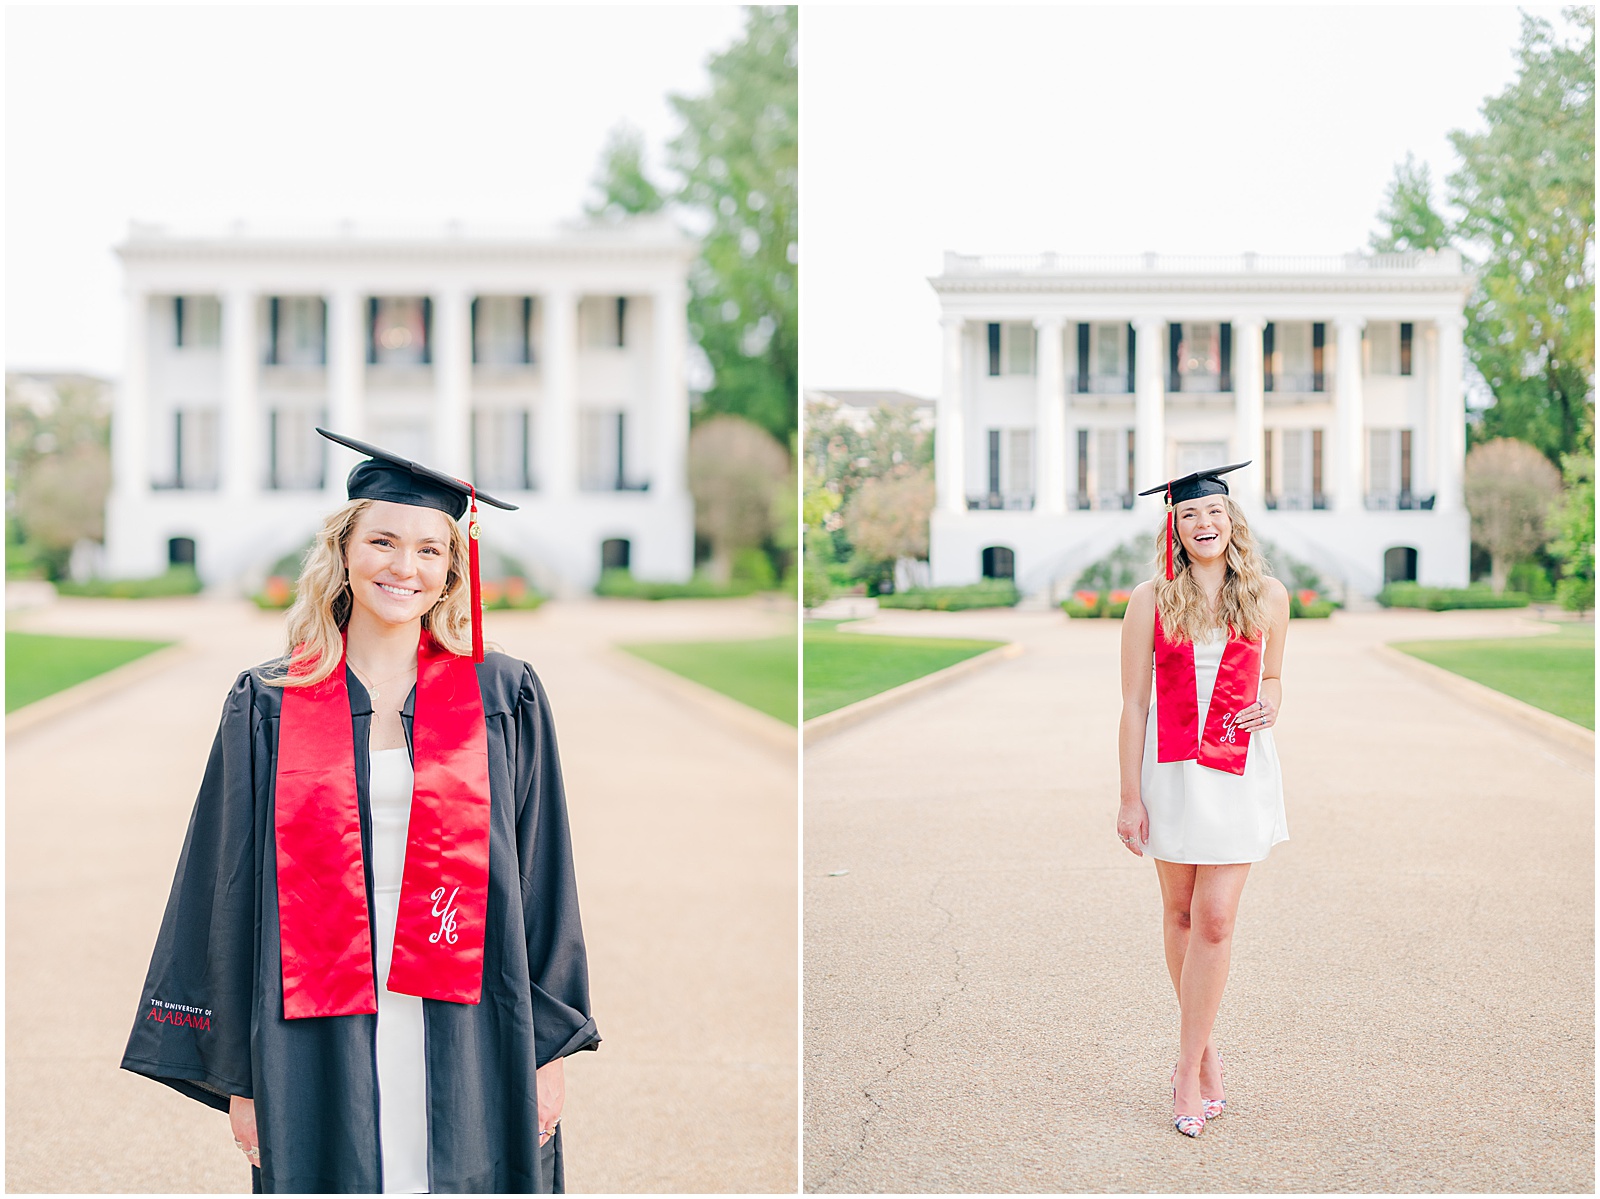 Graduation portraits at The President's Mansion at The University of Alabama